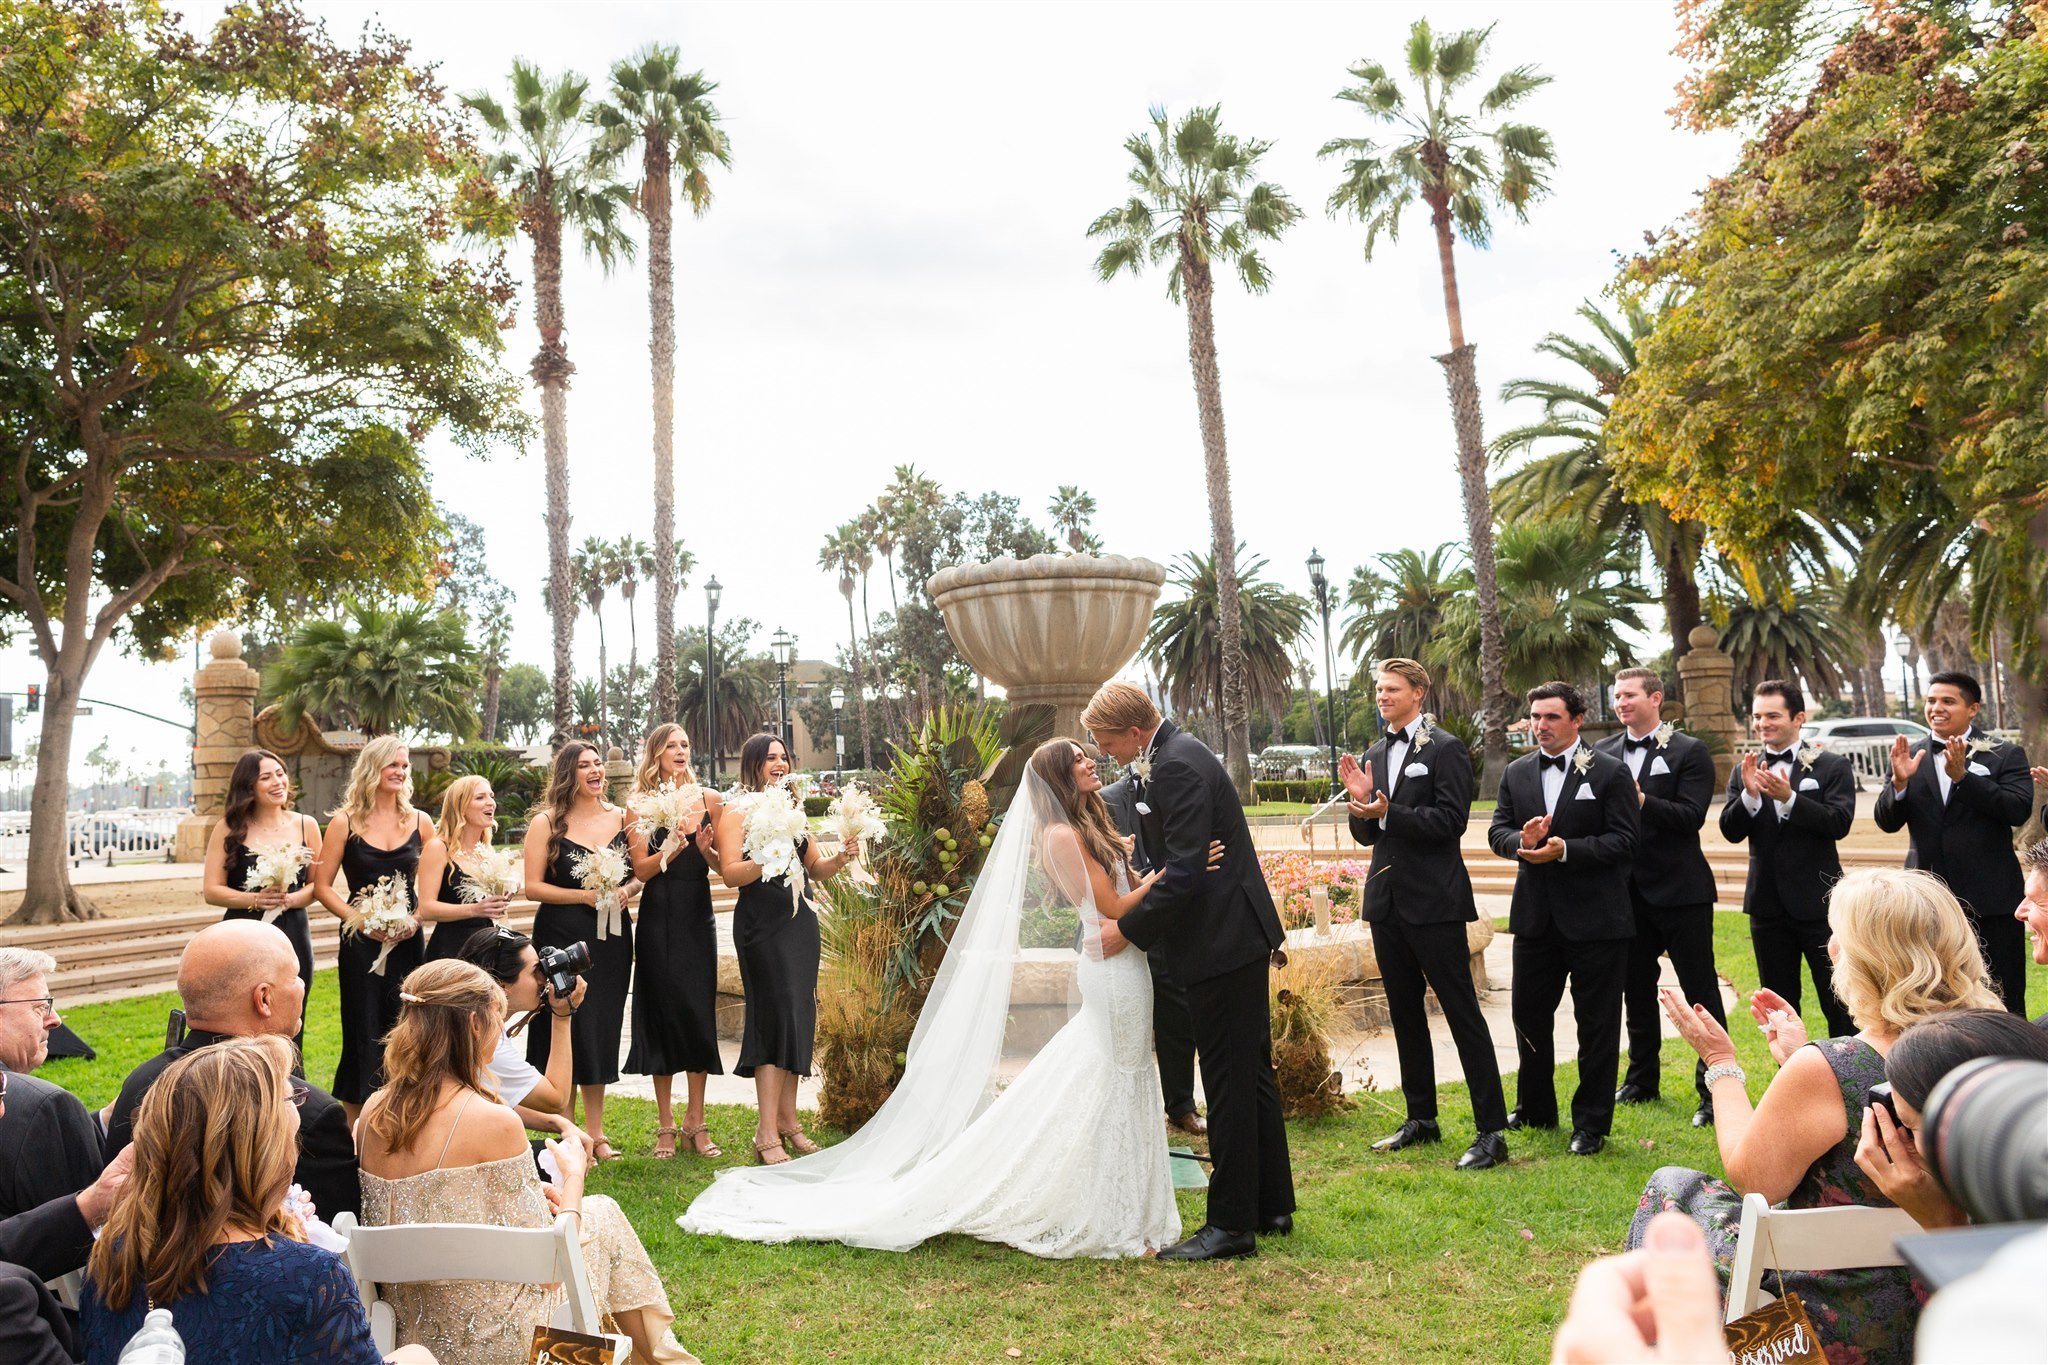 www.santabarbarawedding.com | Carousel House | Wonder Tribe Photography | Wedding Ceremony in the Lawn in Front of the Fountain